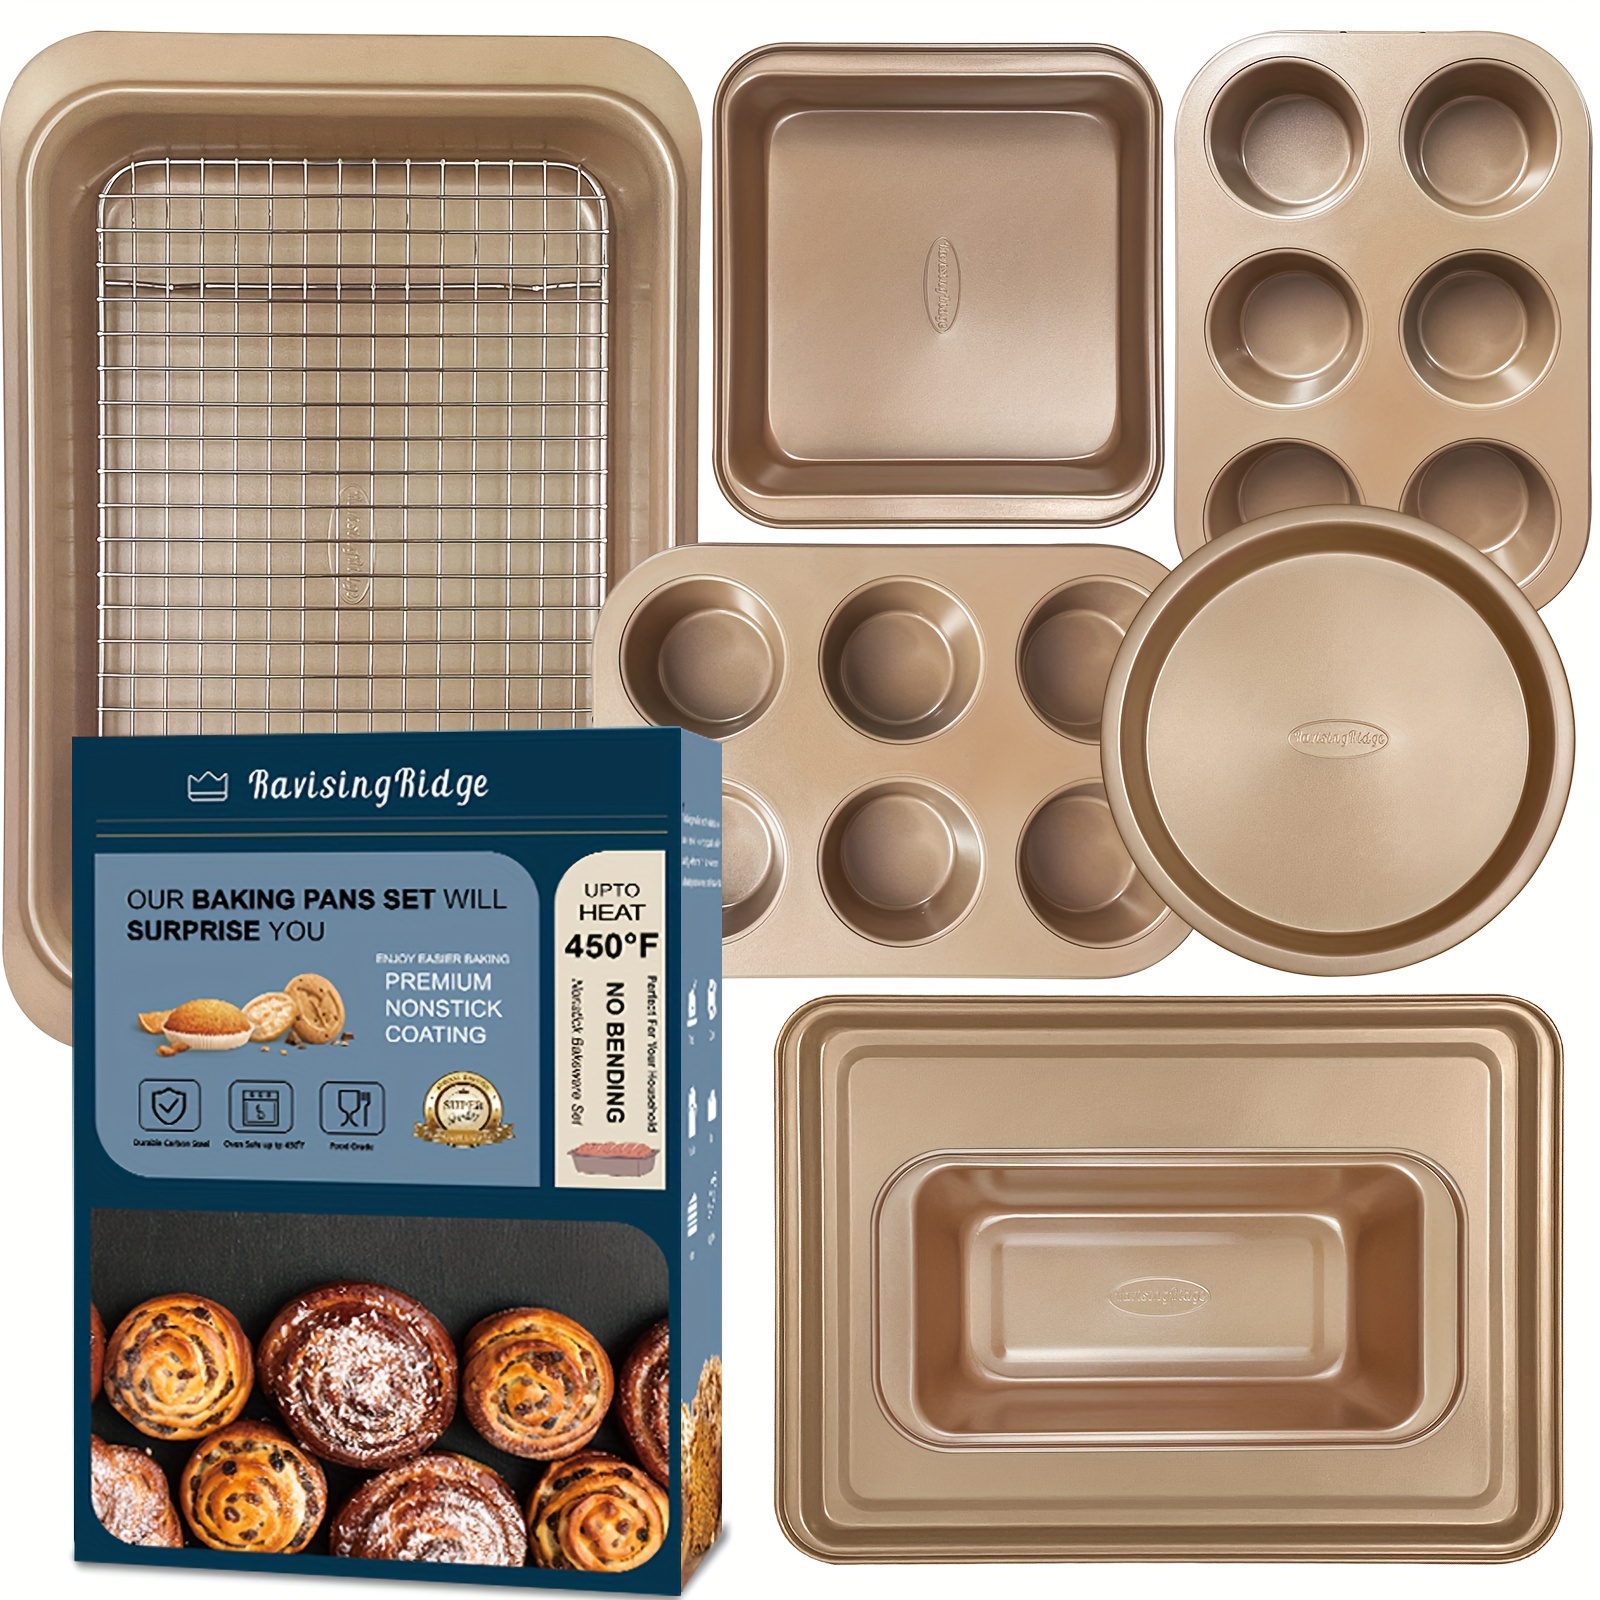 

Baking Pans Set With Nonstick Coating - Ultrathick Professional 8-piece Bi-color Pans Including Cookie Sheet, Muffin, Cake Pans, And Cooling Rack - Heavy Duty, Dishwasher Safe